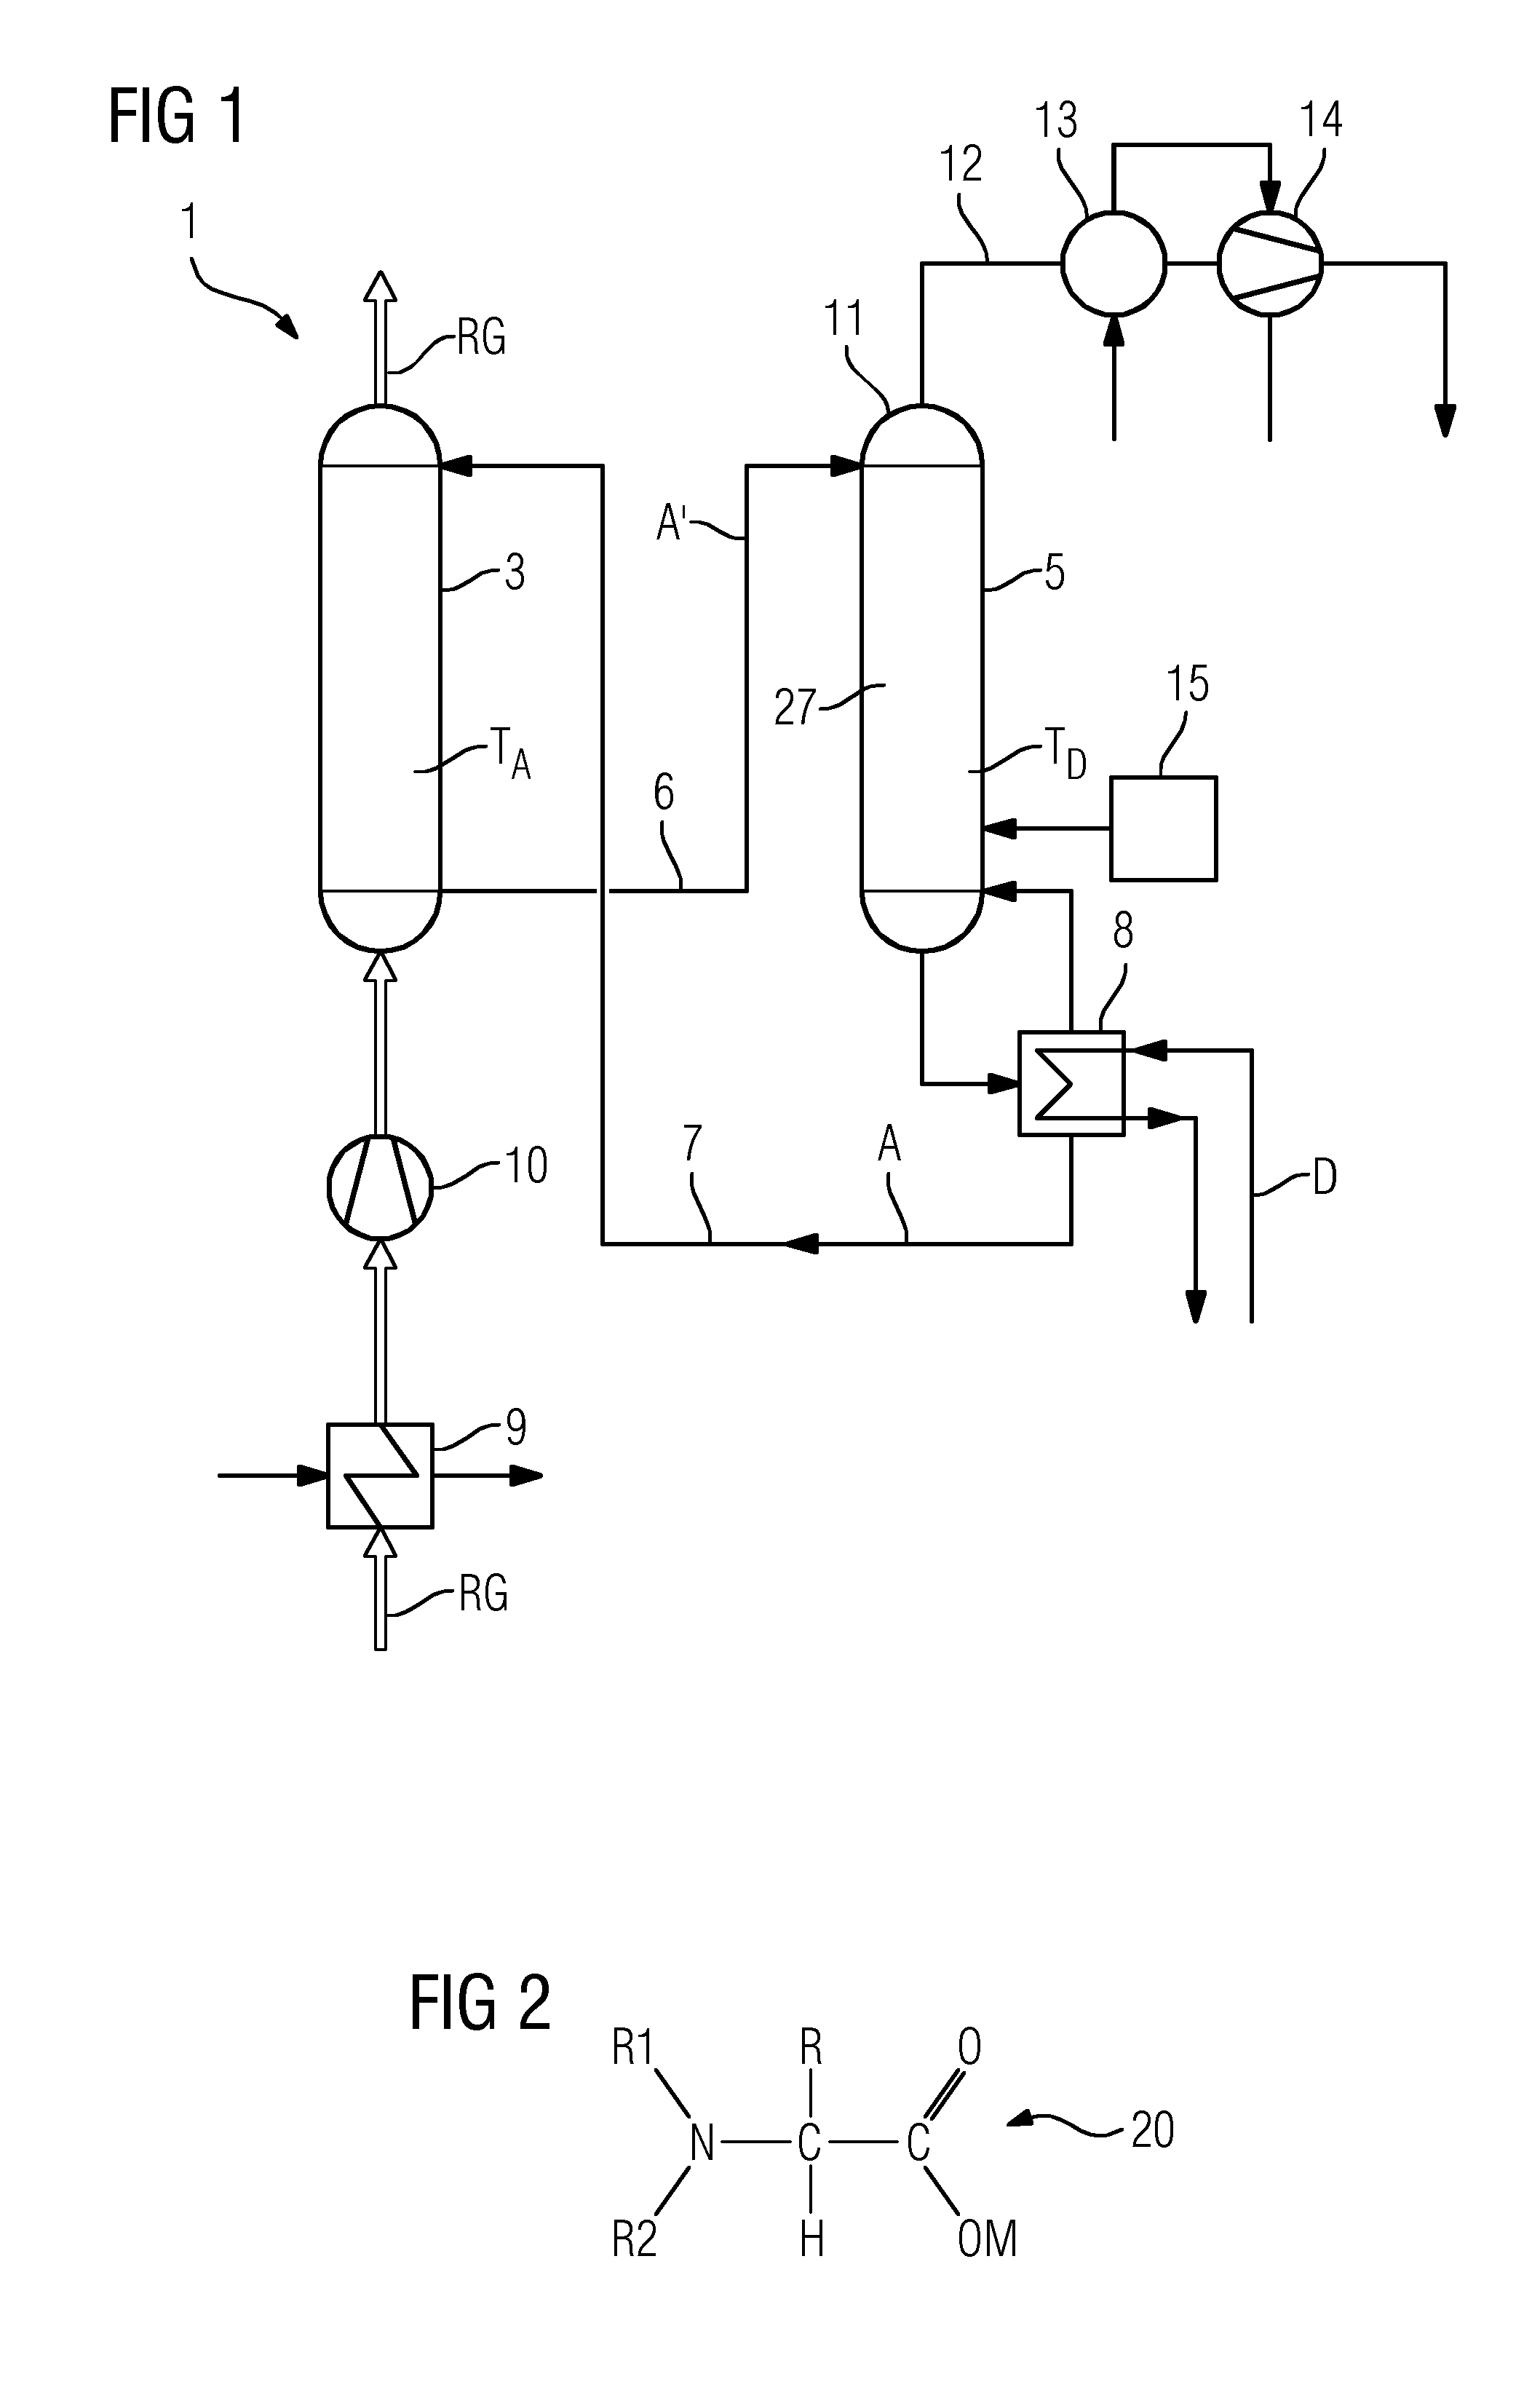 Amine scrubbing solution for absorption of carbon dioxide, with oxidation inhibitors